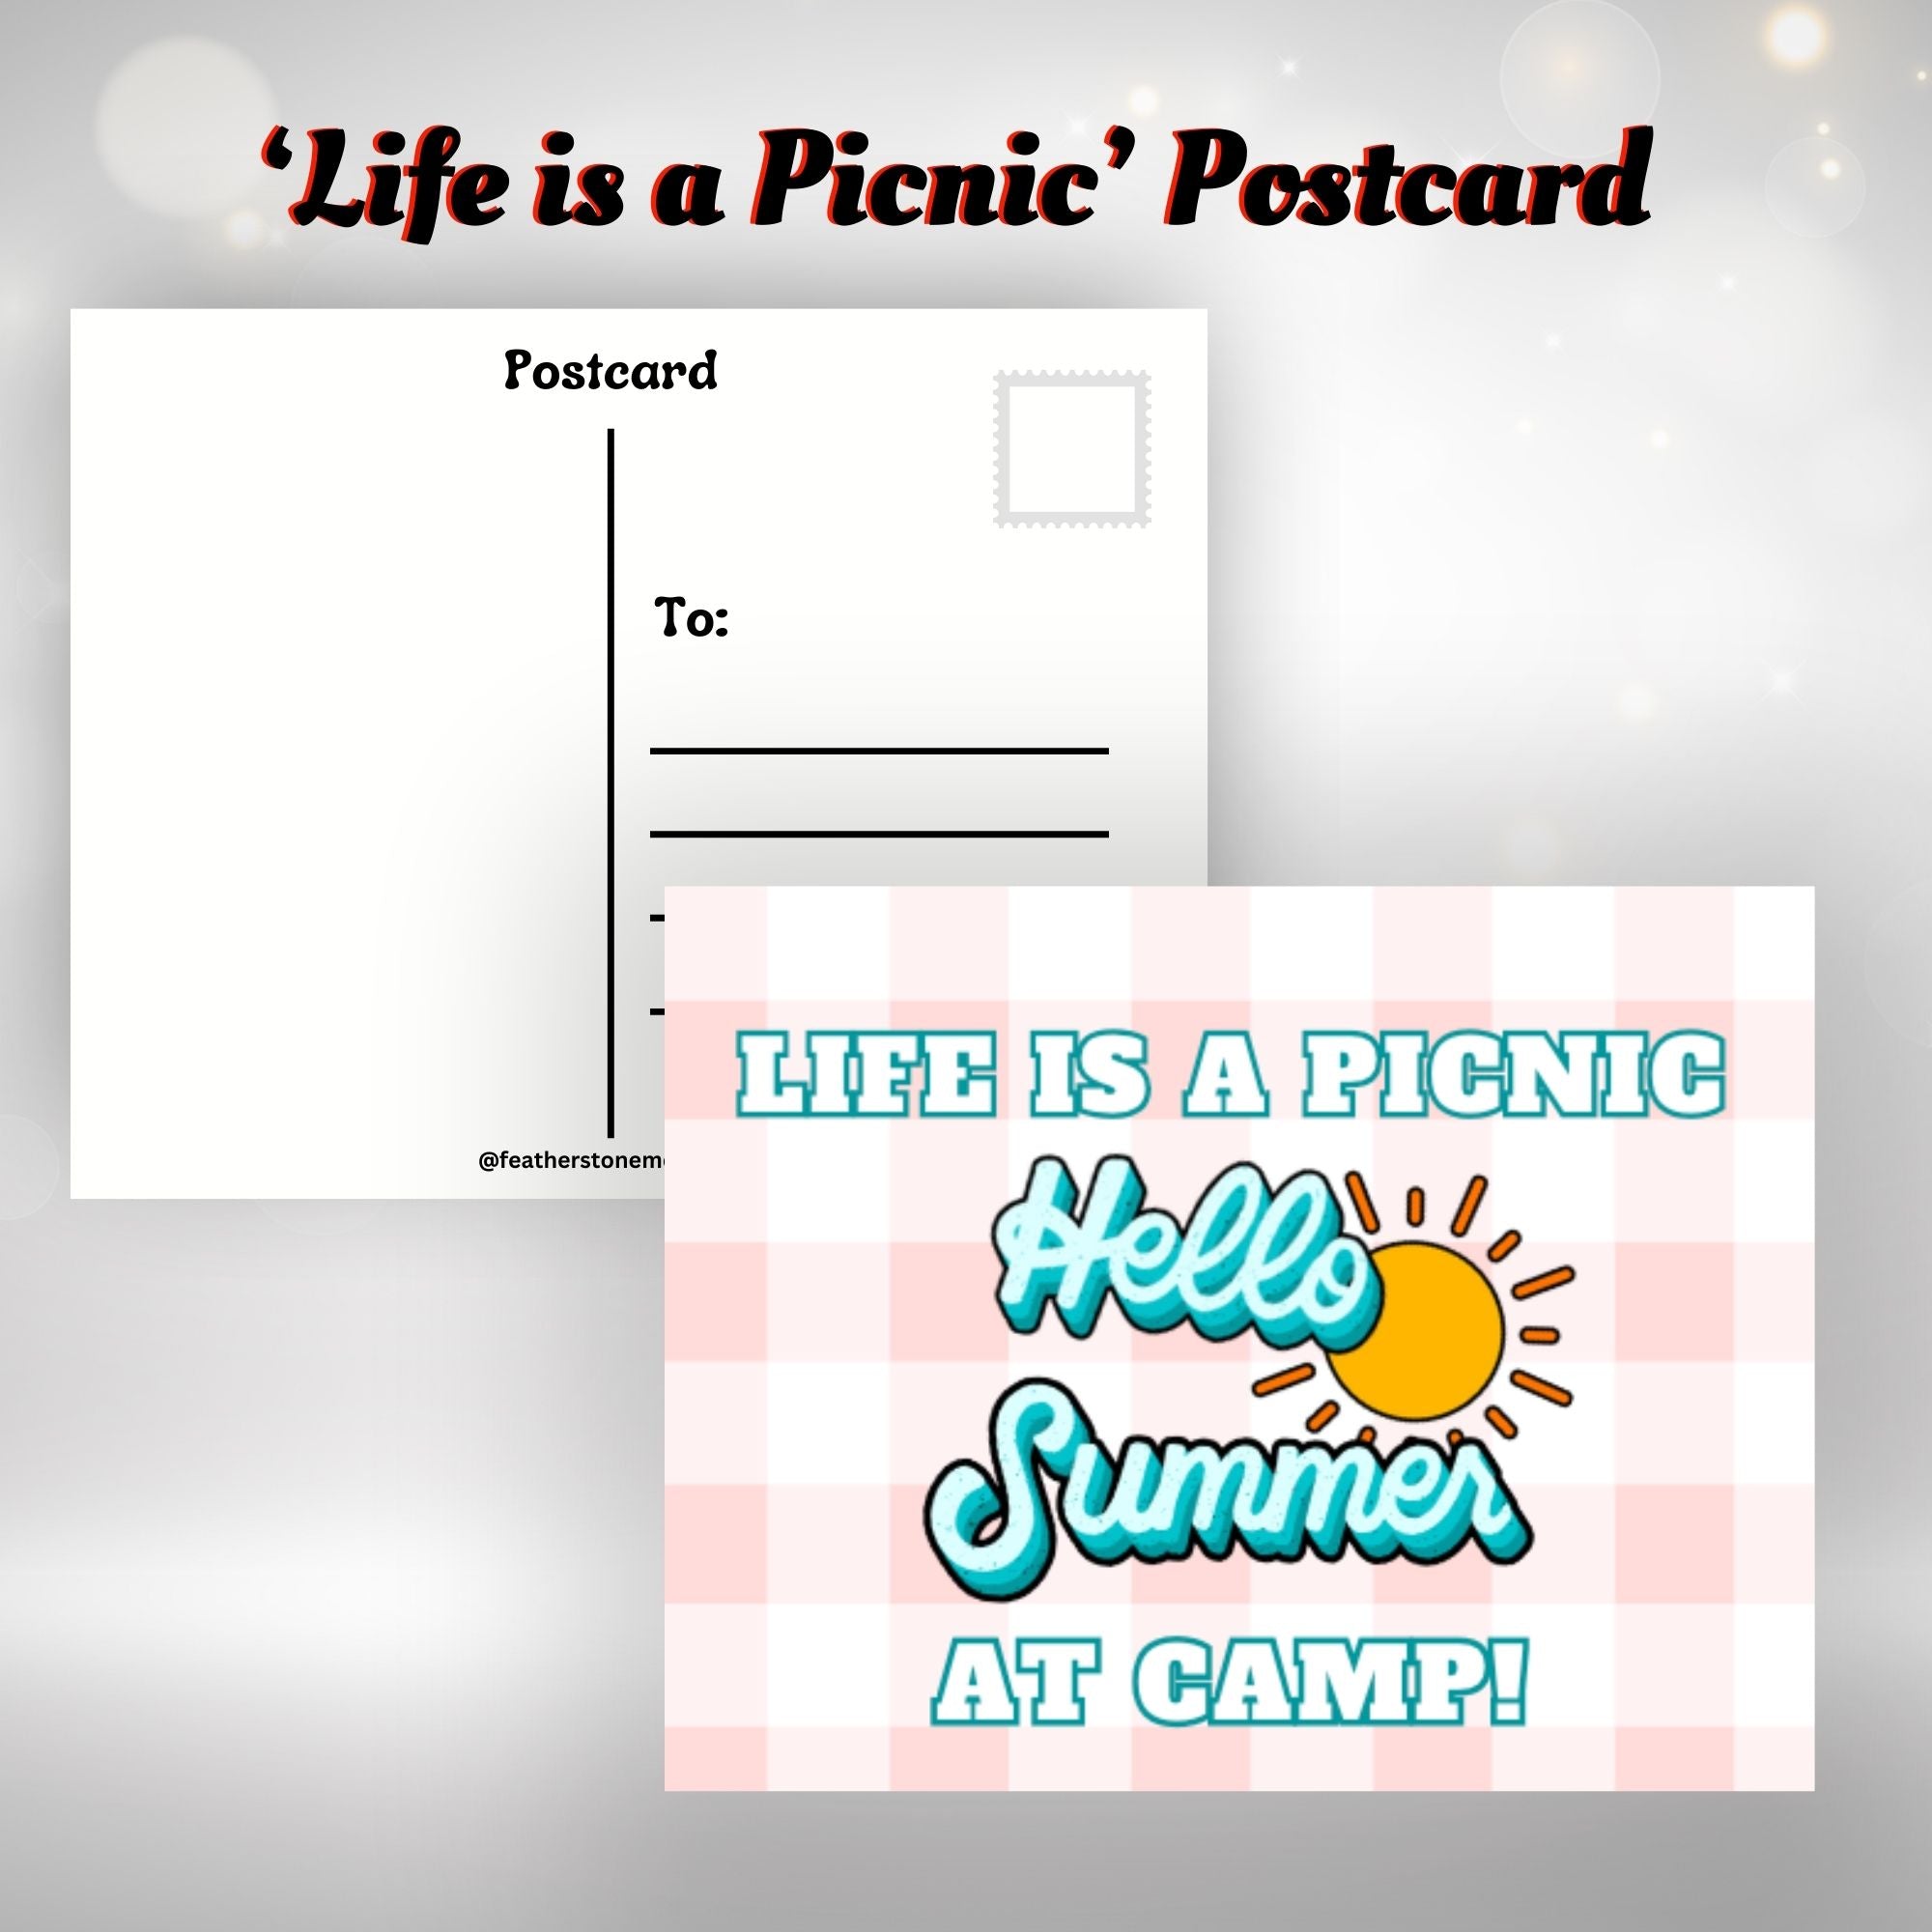 This image shows the Life is a Picnic at Camp! with the words Hello Summer and a sun in the center.